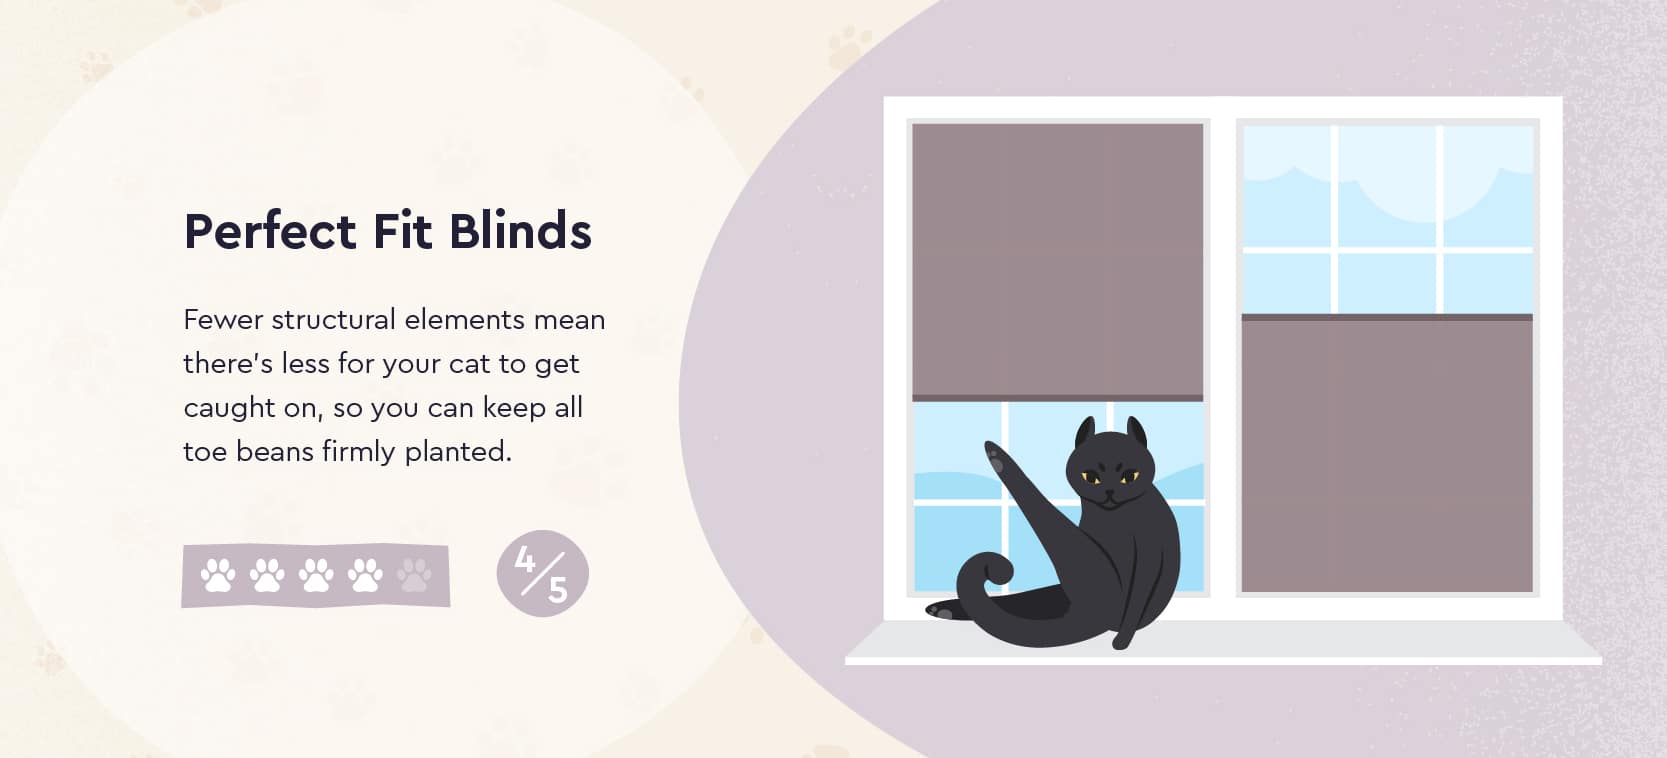 Perfect Fit Blinds and a cat sat on a window sill